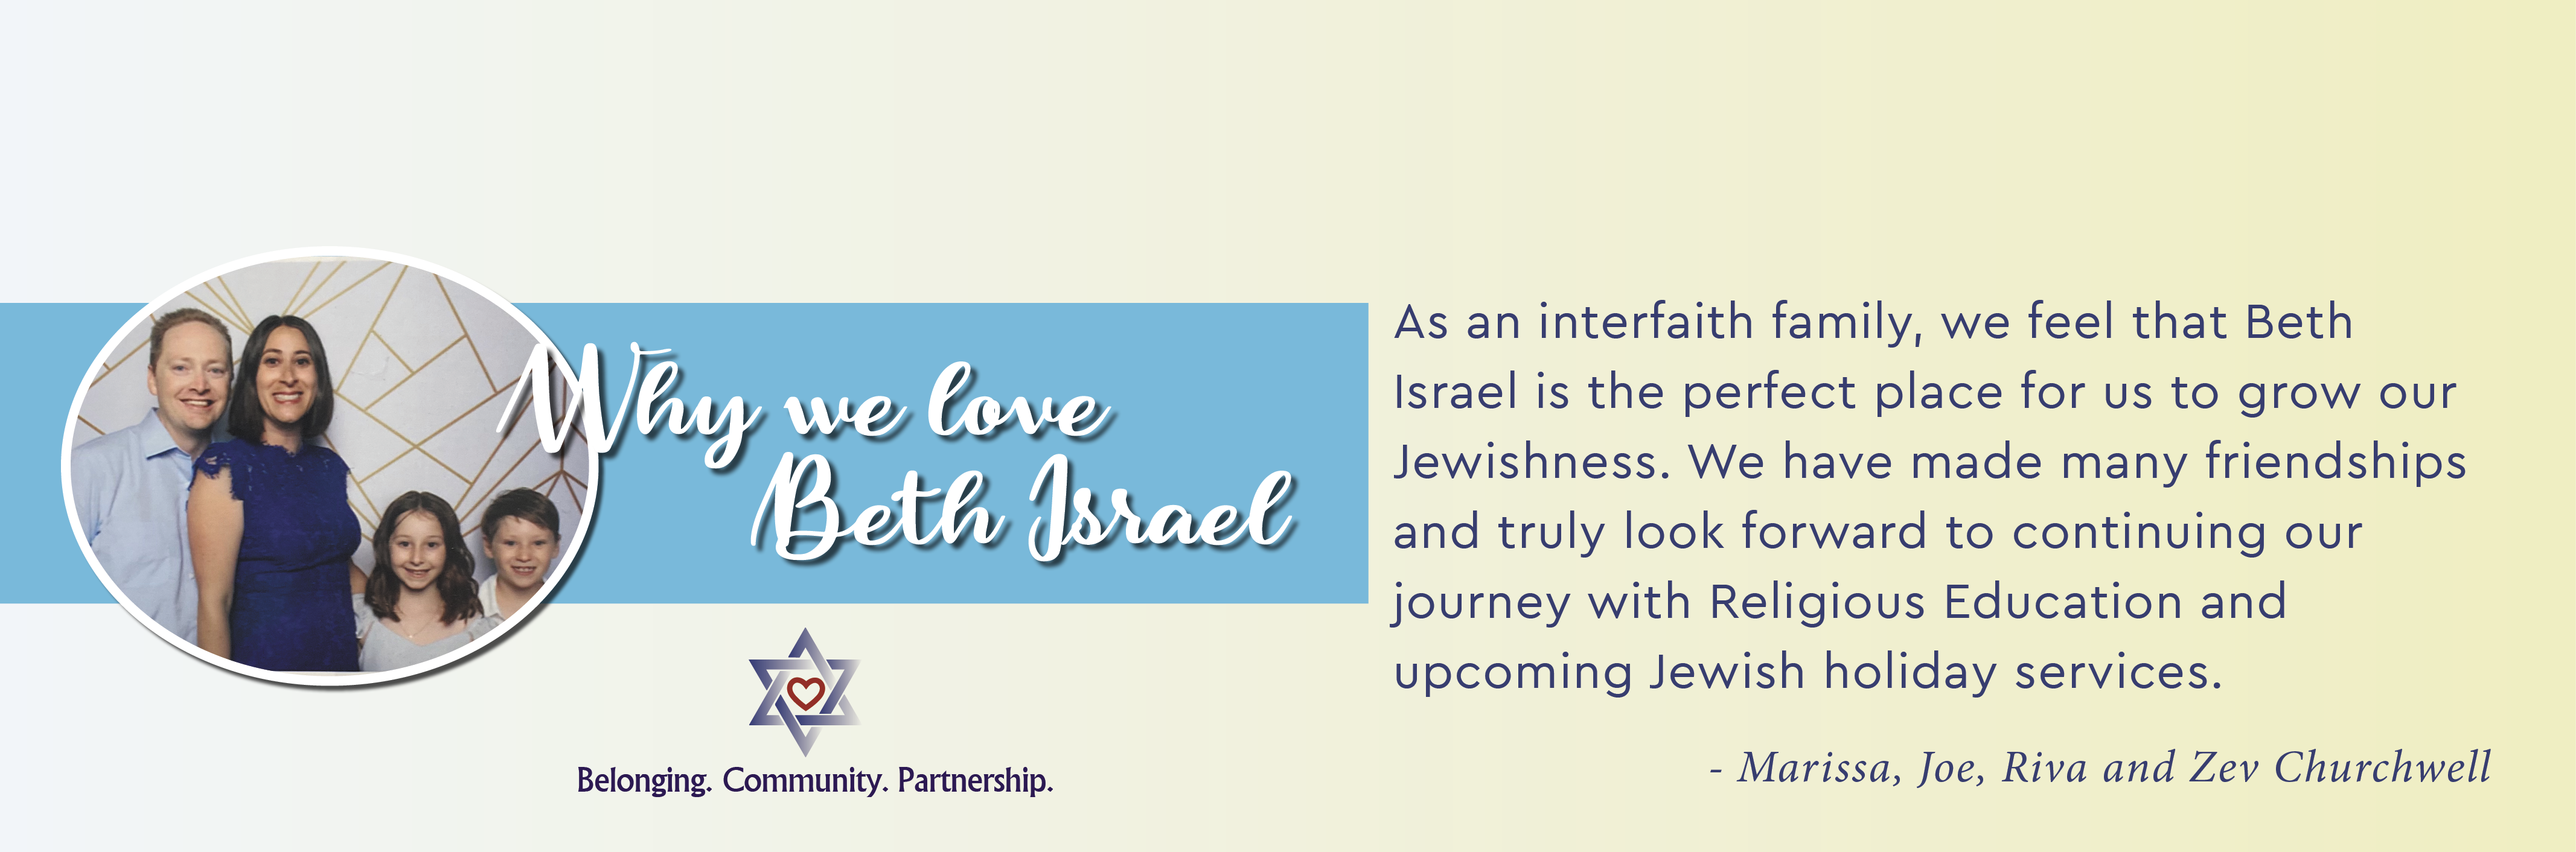 Why we love Beth Israel - As in interfaith family, we feel that Beth Israel is the perfect place for us to grow our Jewishness. We have made many friendships and truly look forward to continuing our journey with Religious Education and upcoming Jewish holiday services. - Marissa, Joe, Riva and Zev Churchwell